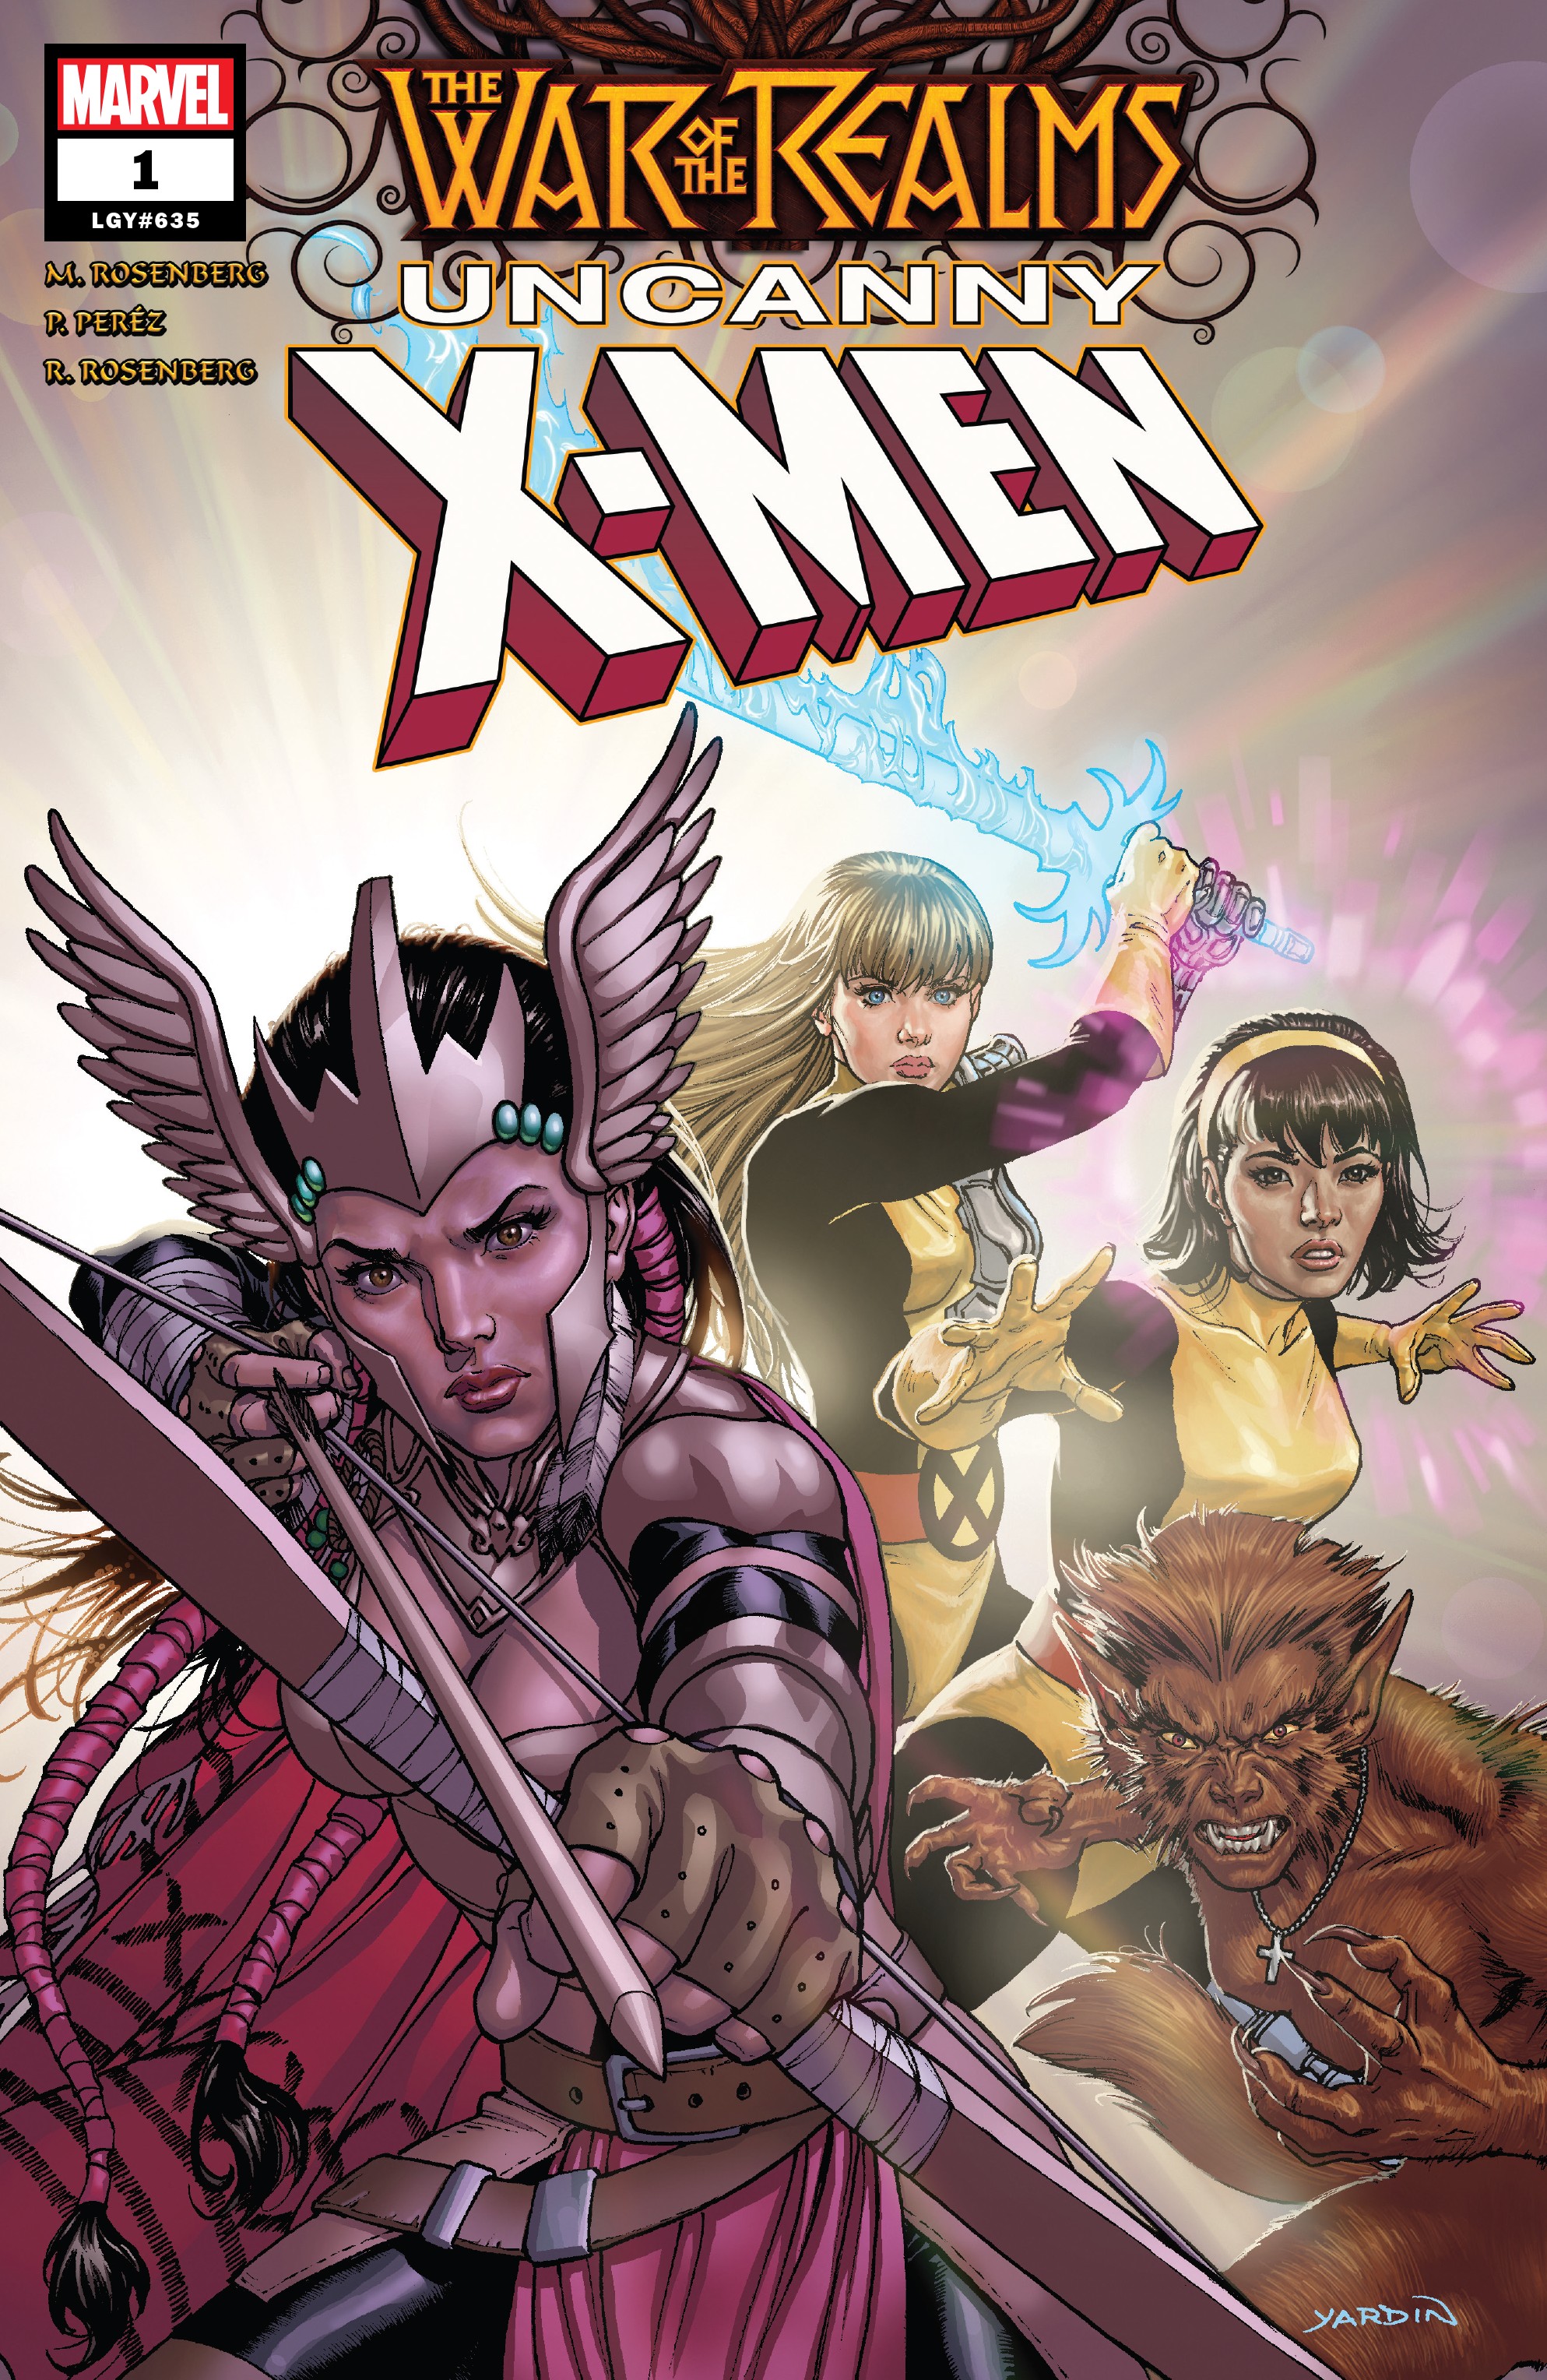 Read online War of the Realms: Uncanny X-Men comic -  Issue #1 - 1